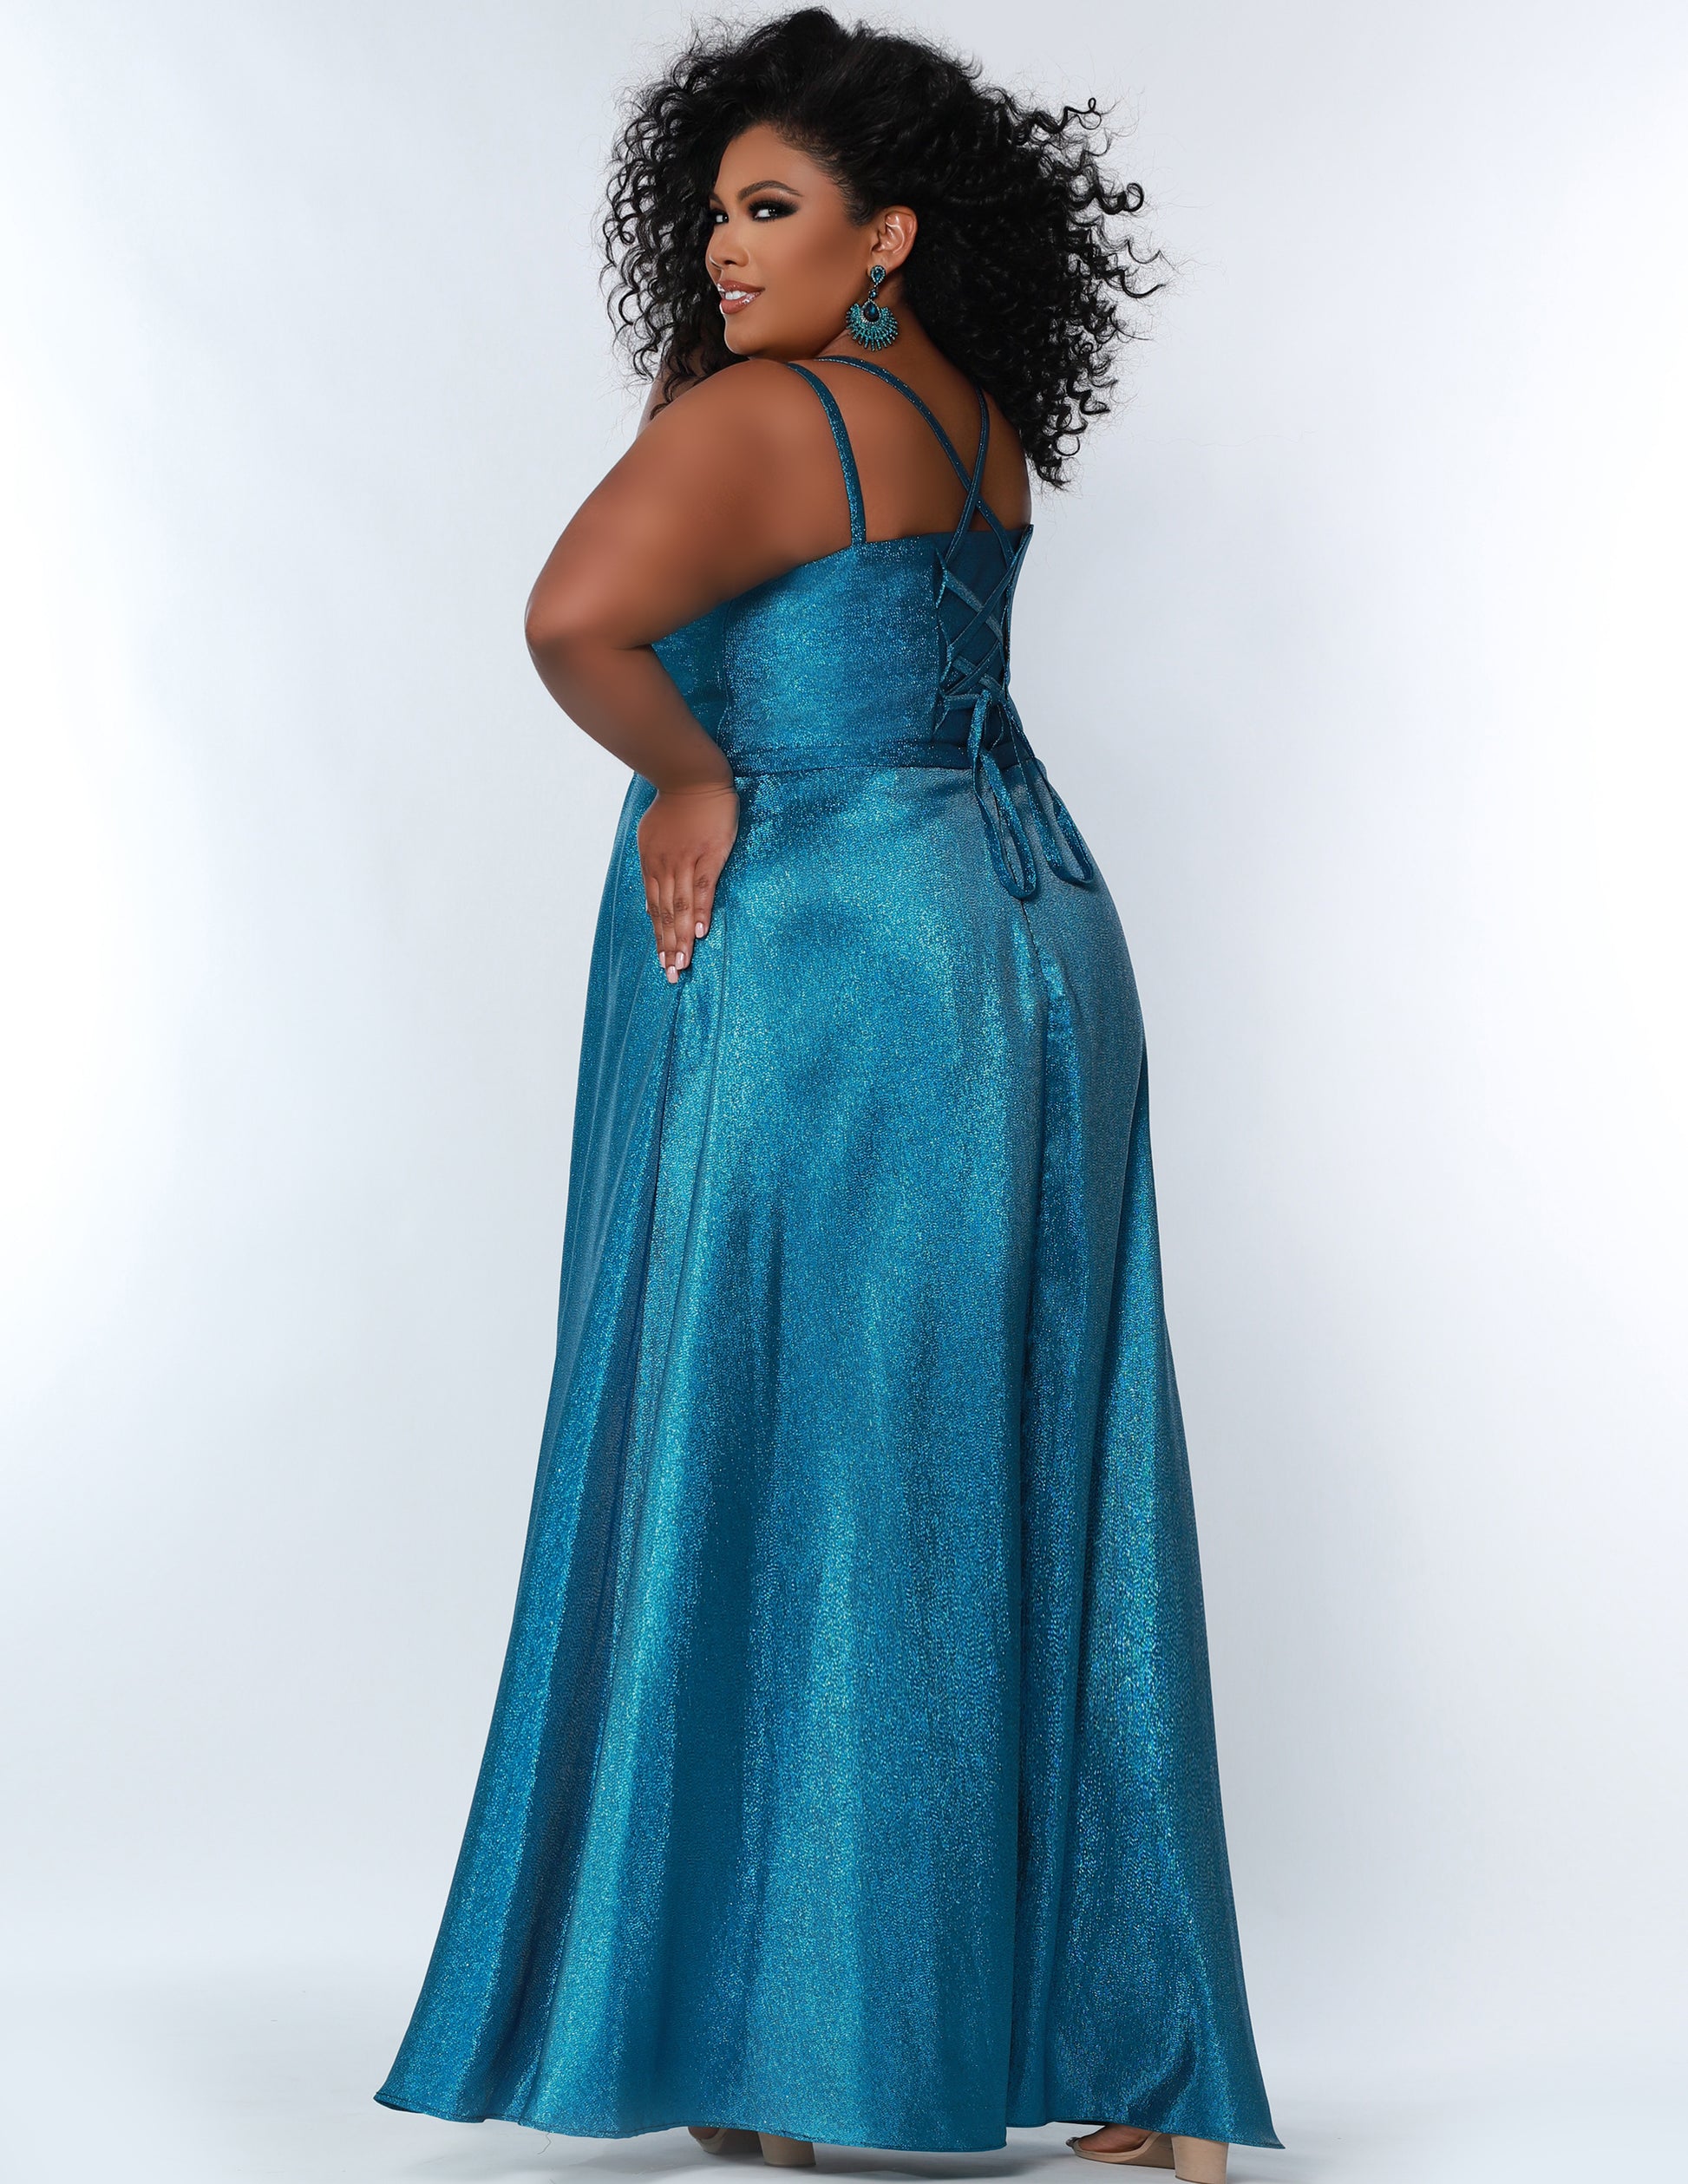 Sydney's Closet SC7344 prom dress delivers a modern and romantic look with its shimmer satin fabric, scoop neckline, A-line silhouette, and corset bodice with side slit. Perfect for making a statement on special occasions.  SC7344